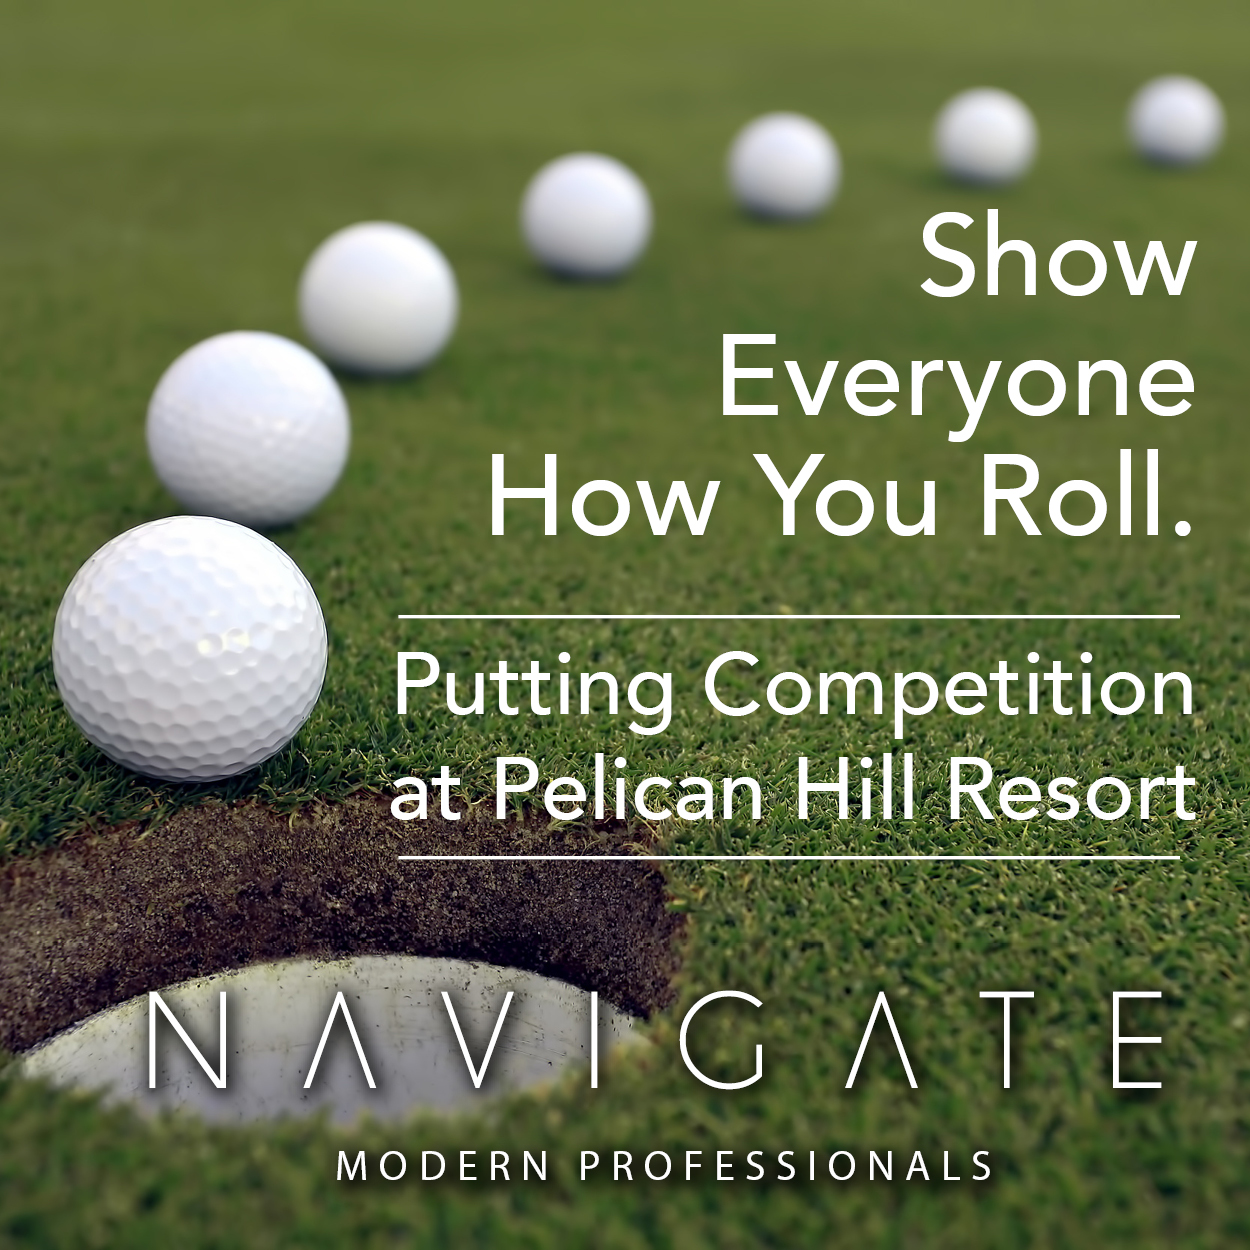 July NAVIGATE: Modern Professionals - Putting Competition at Pelican Hill